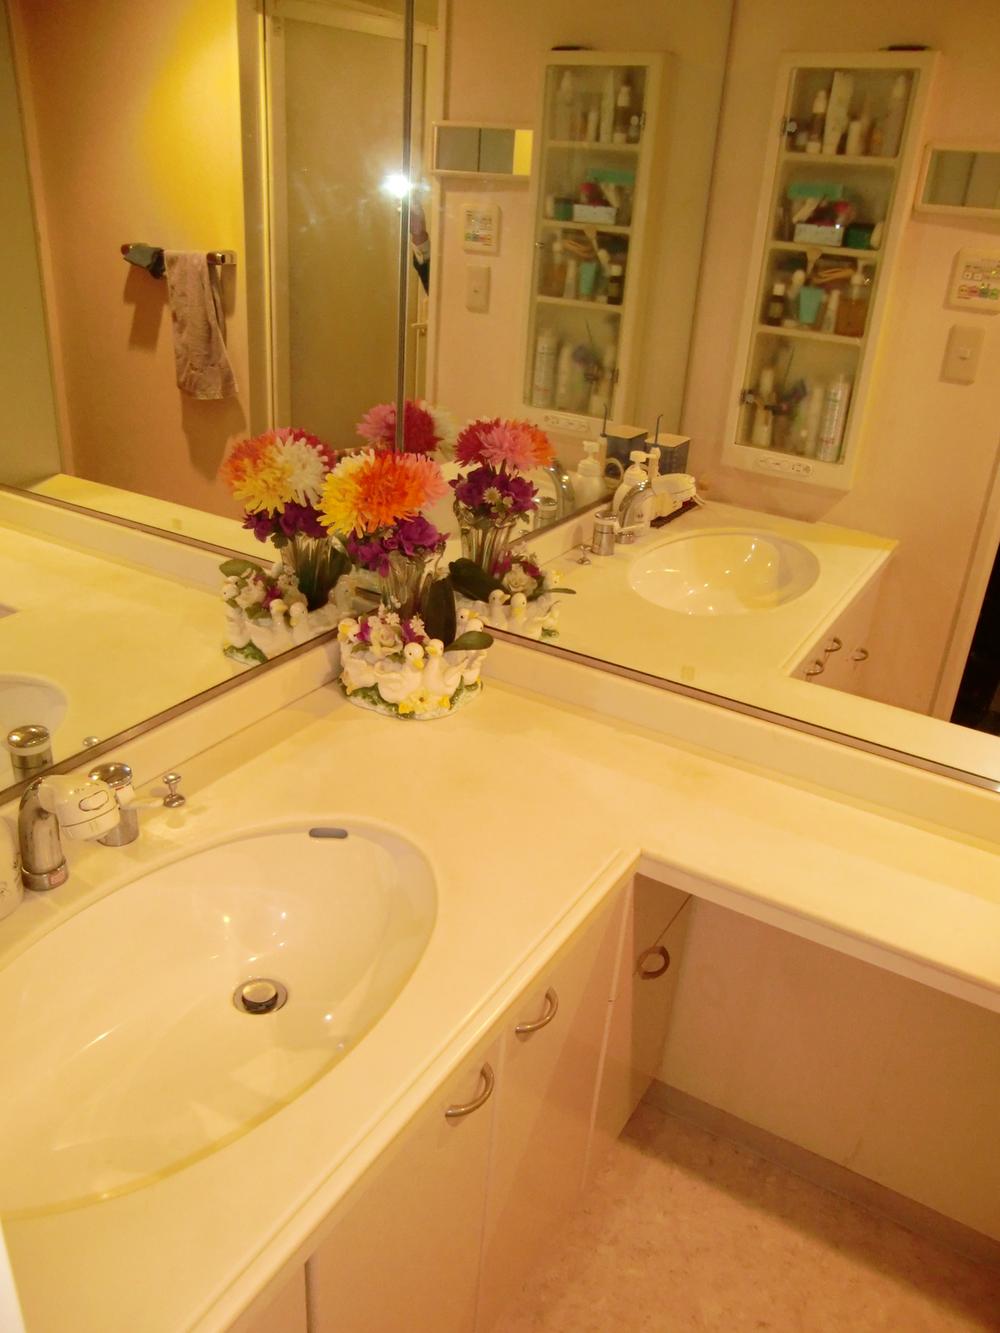 Wash basin, toilet. L-shaped vanity comfortably use with your family